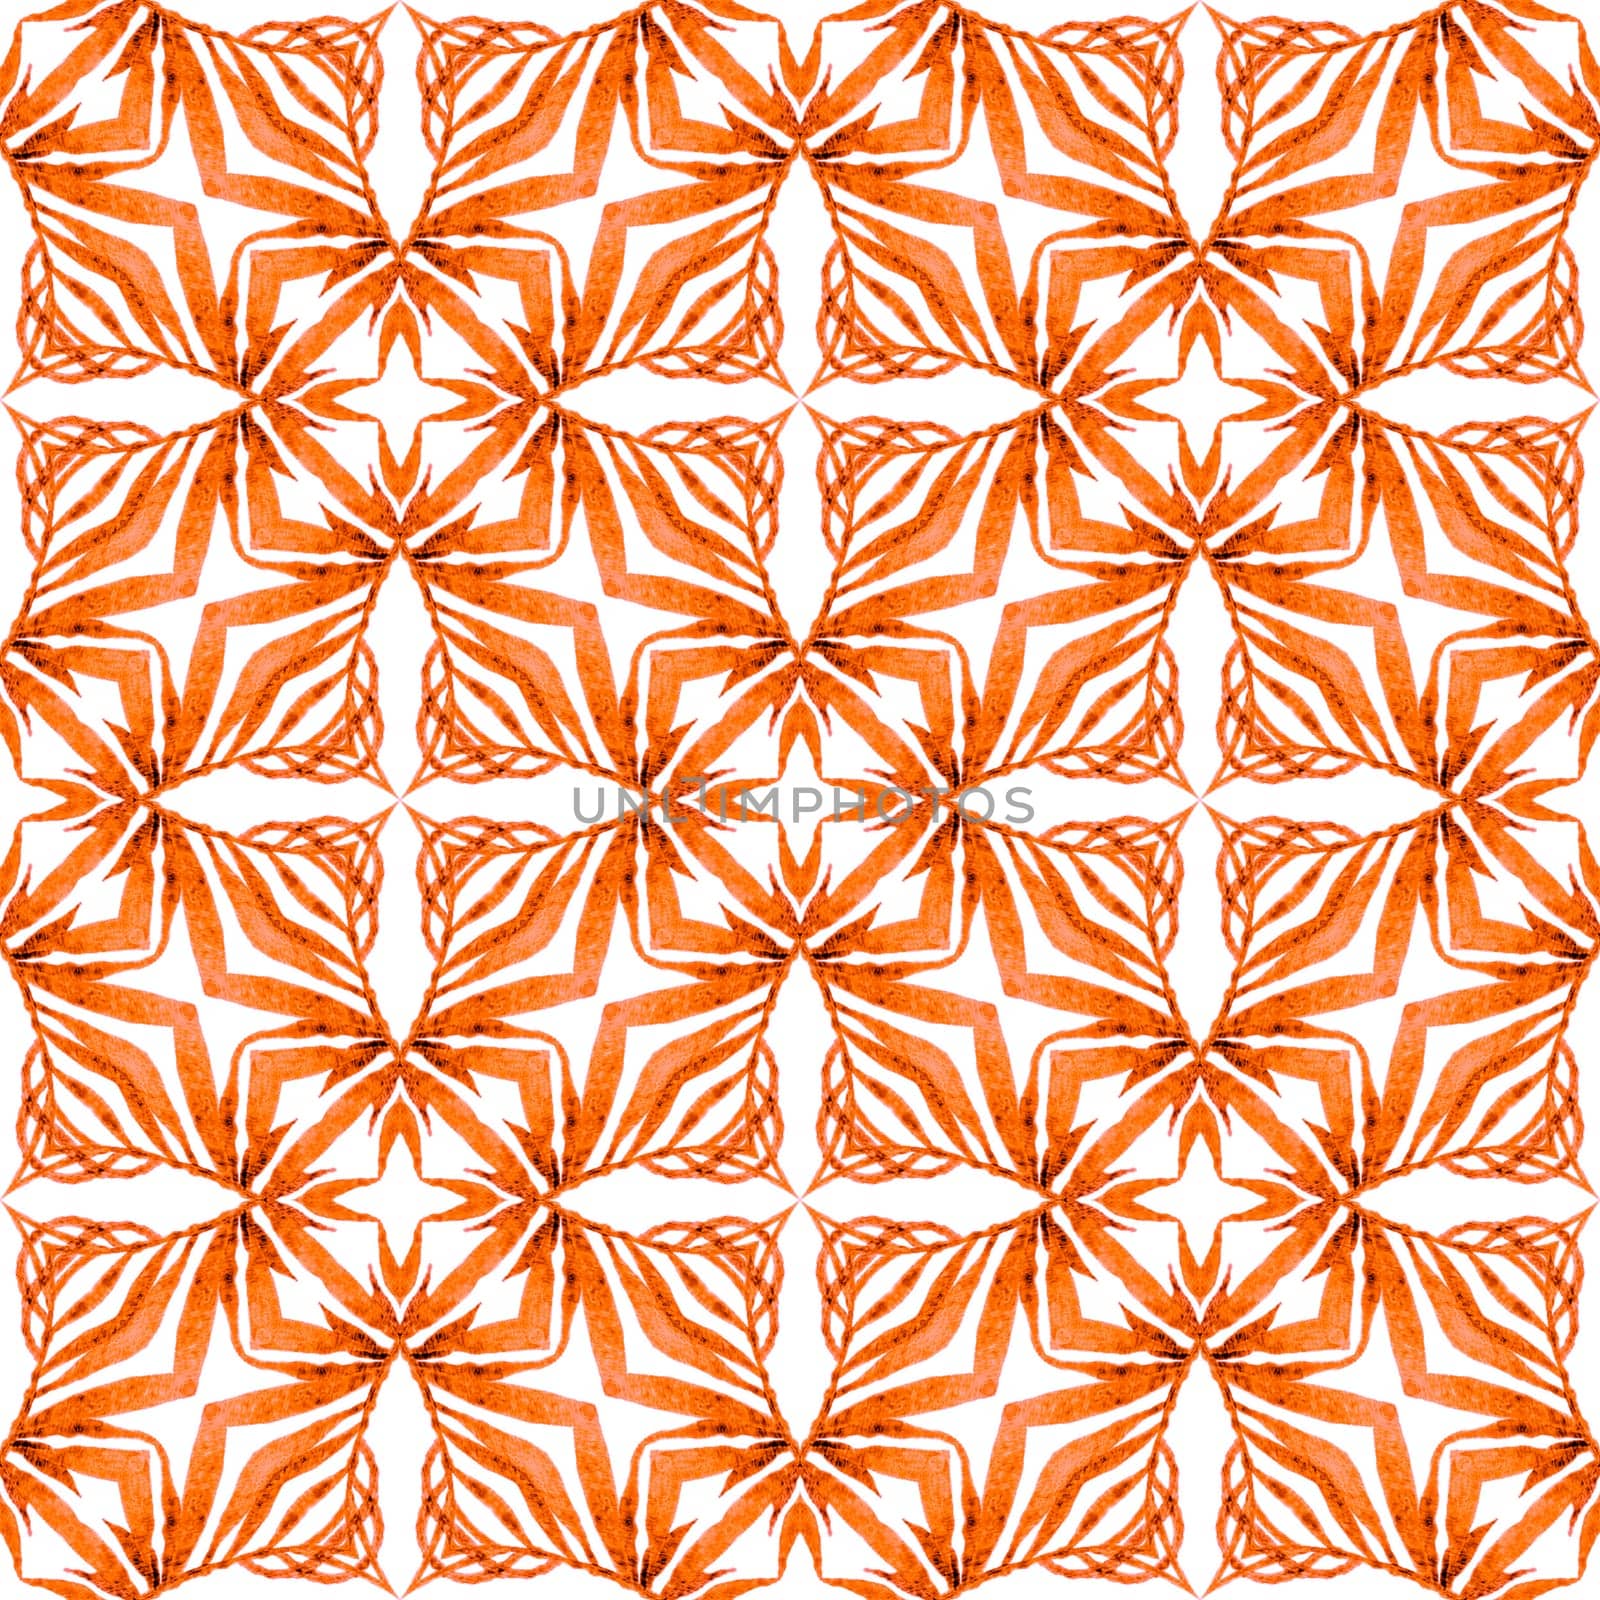 Ethnic hand painted pattern. Orange exotic boho chic summer design. Textile ready popular print, swimwear fabric, wallpaper, wrapping. Watercolor summer ethnic border pattern.